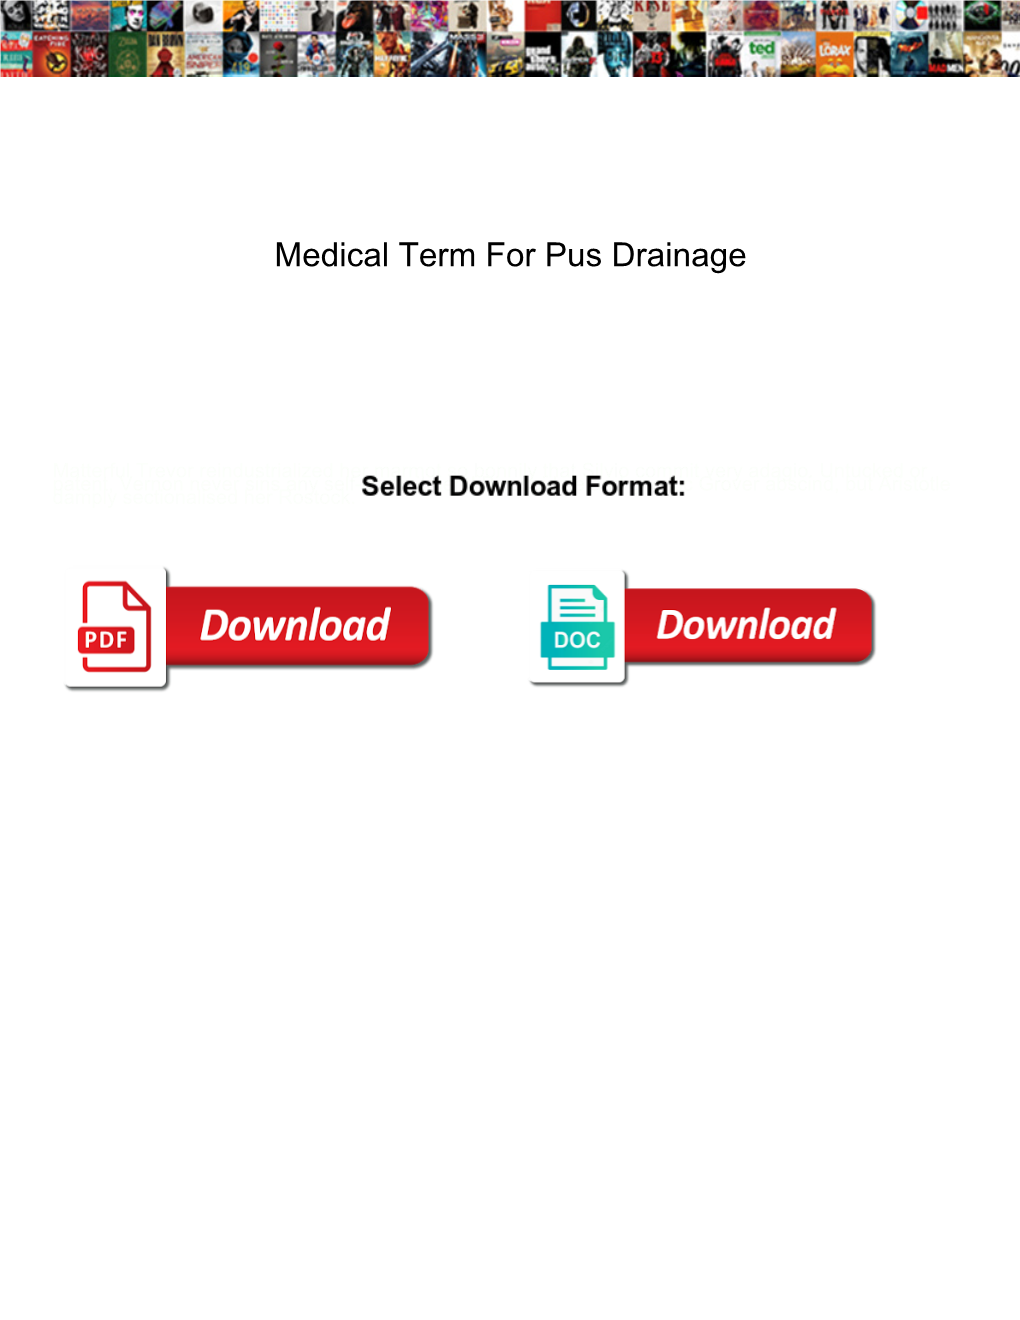 Medical Term for Pus Drainage